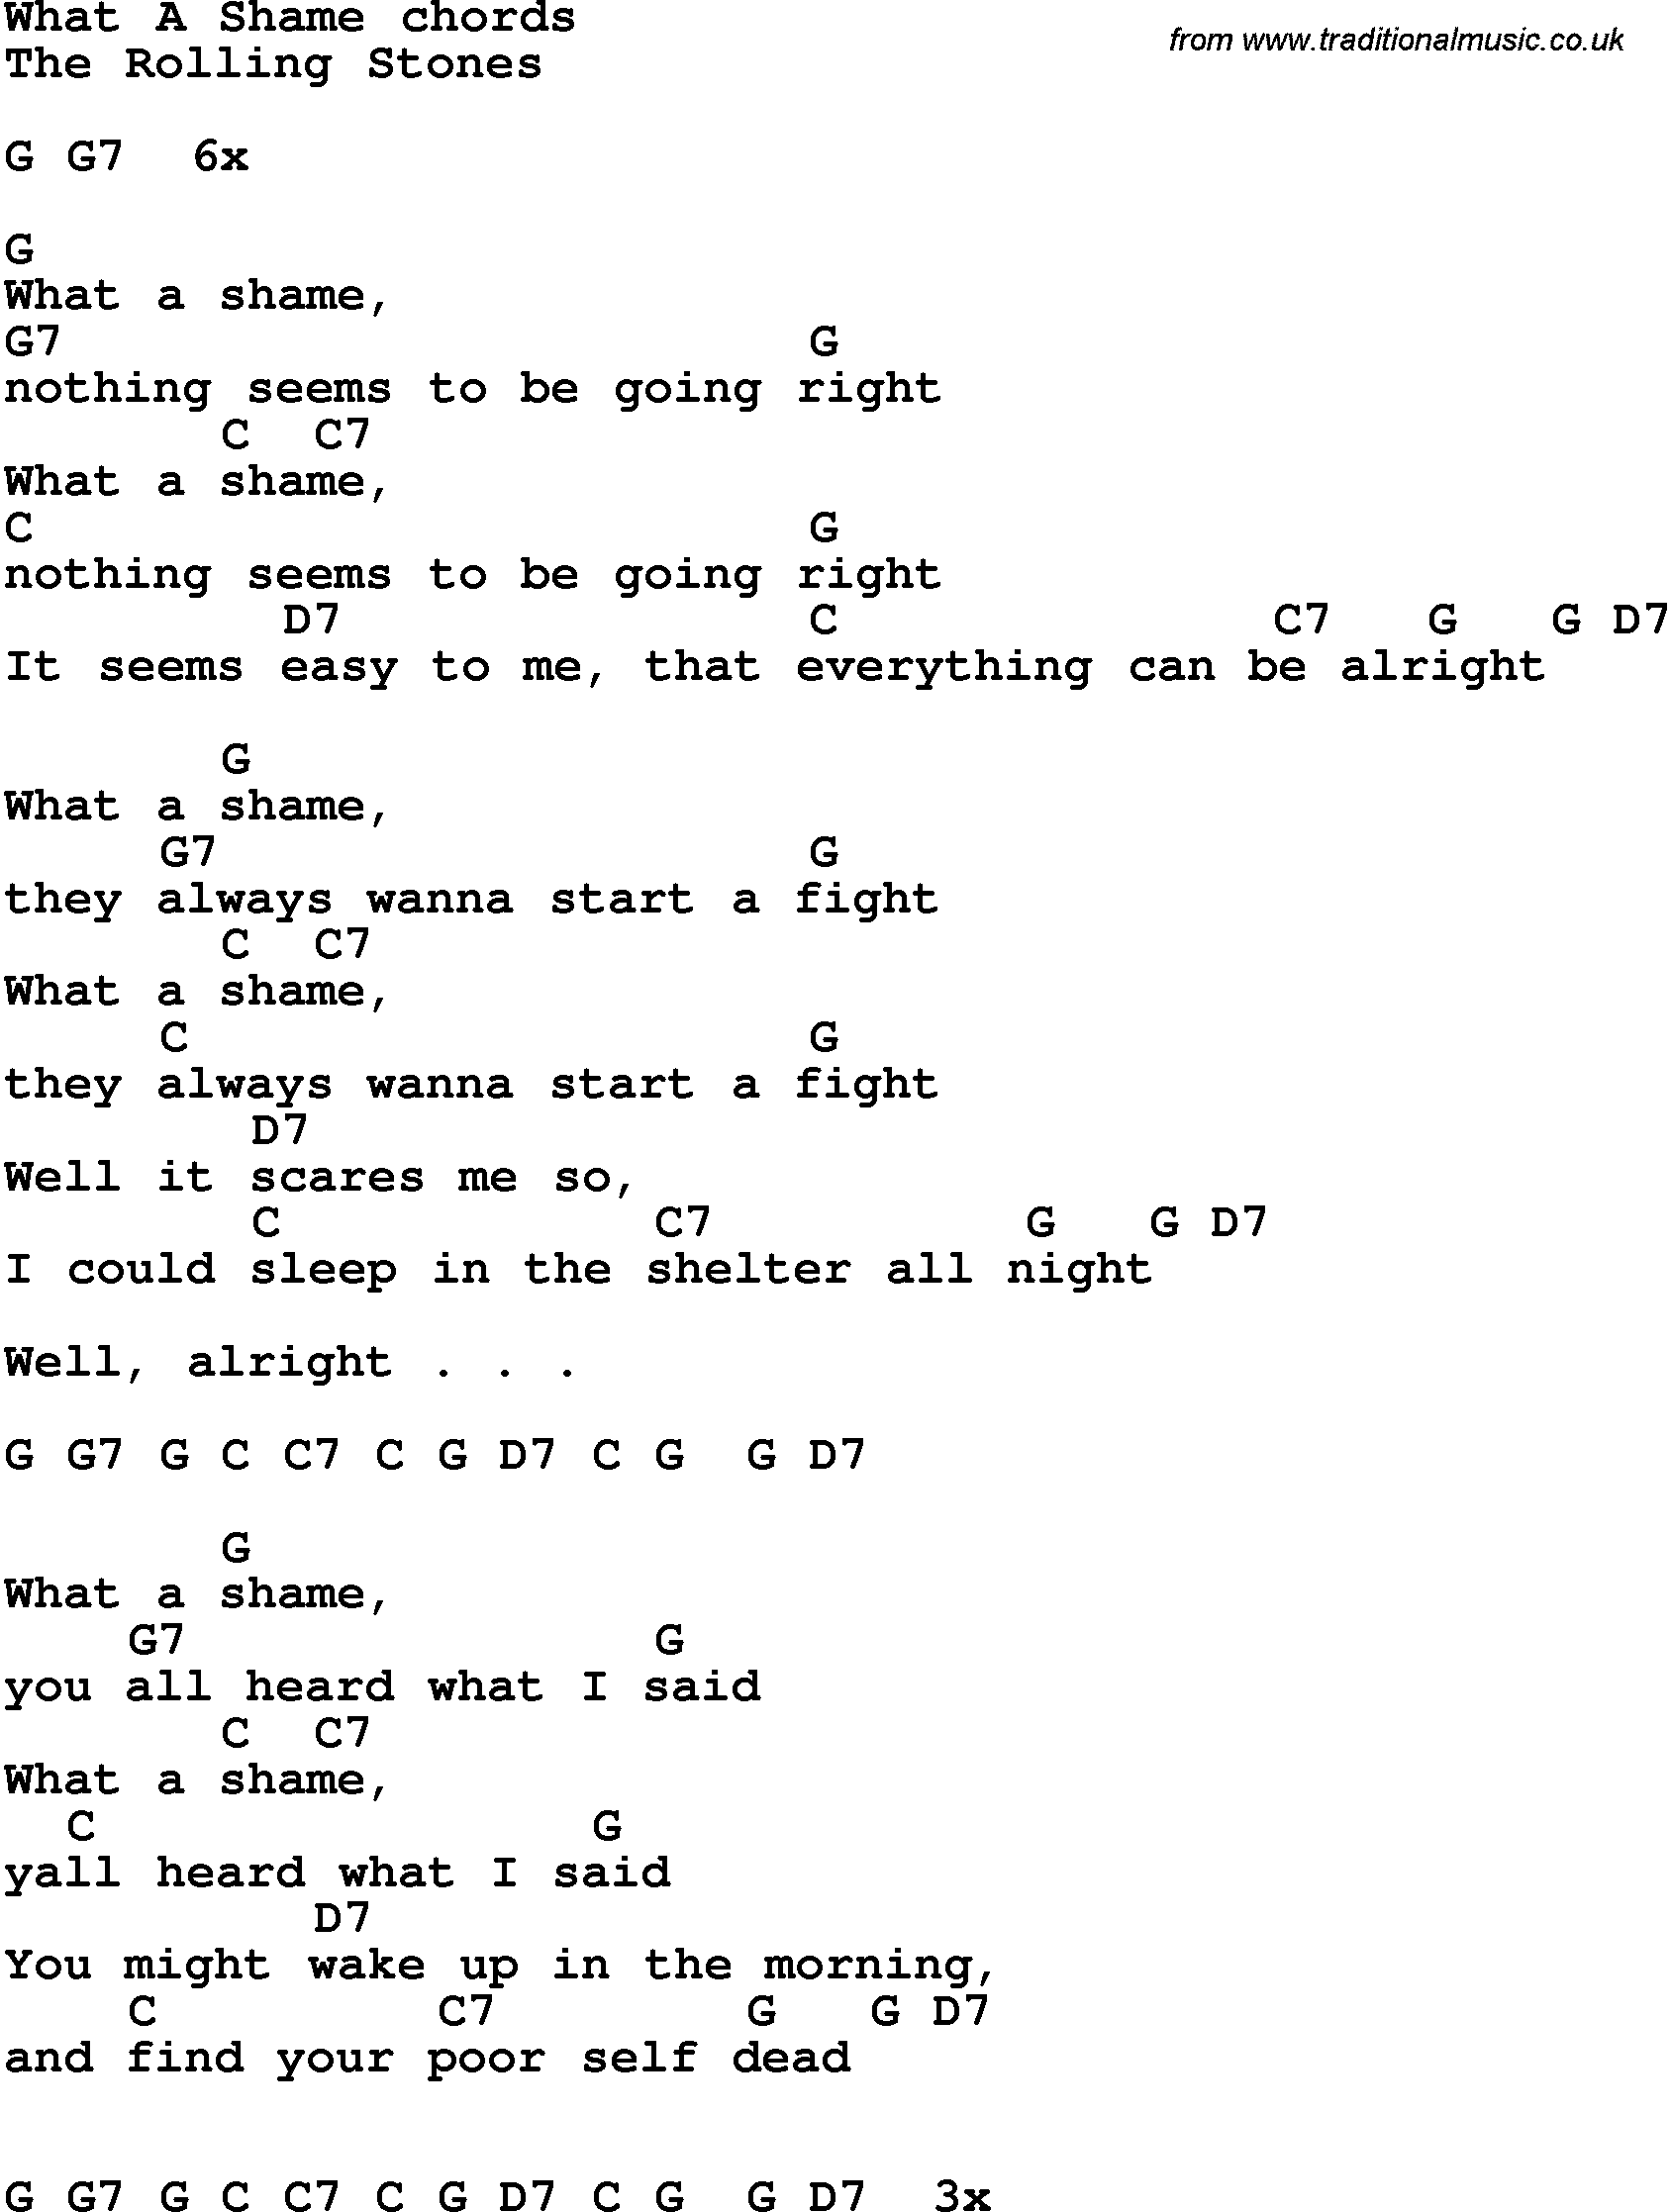 Song Lyrics with guitar chords for What A Shame